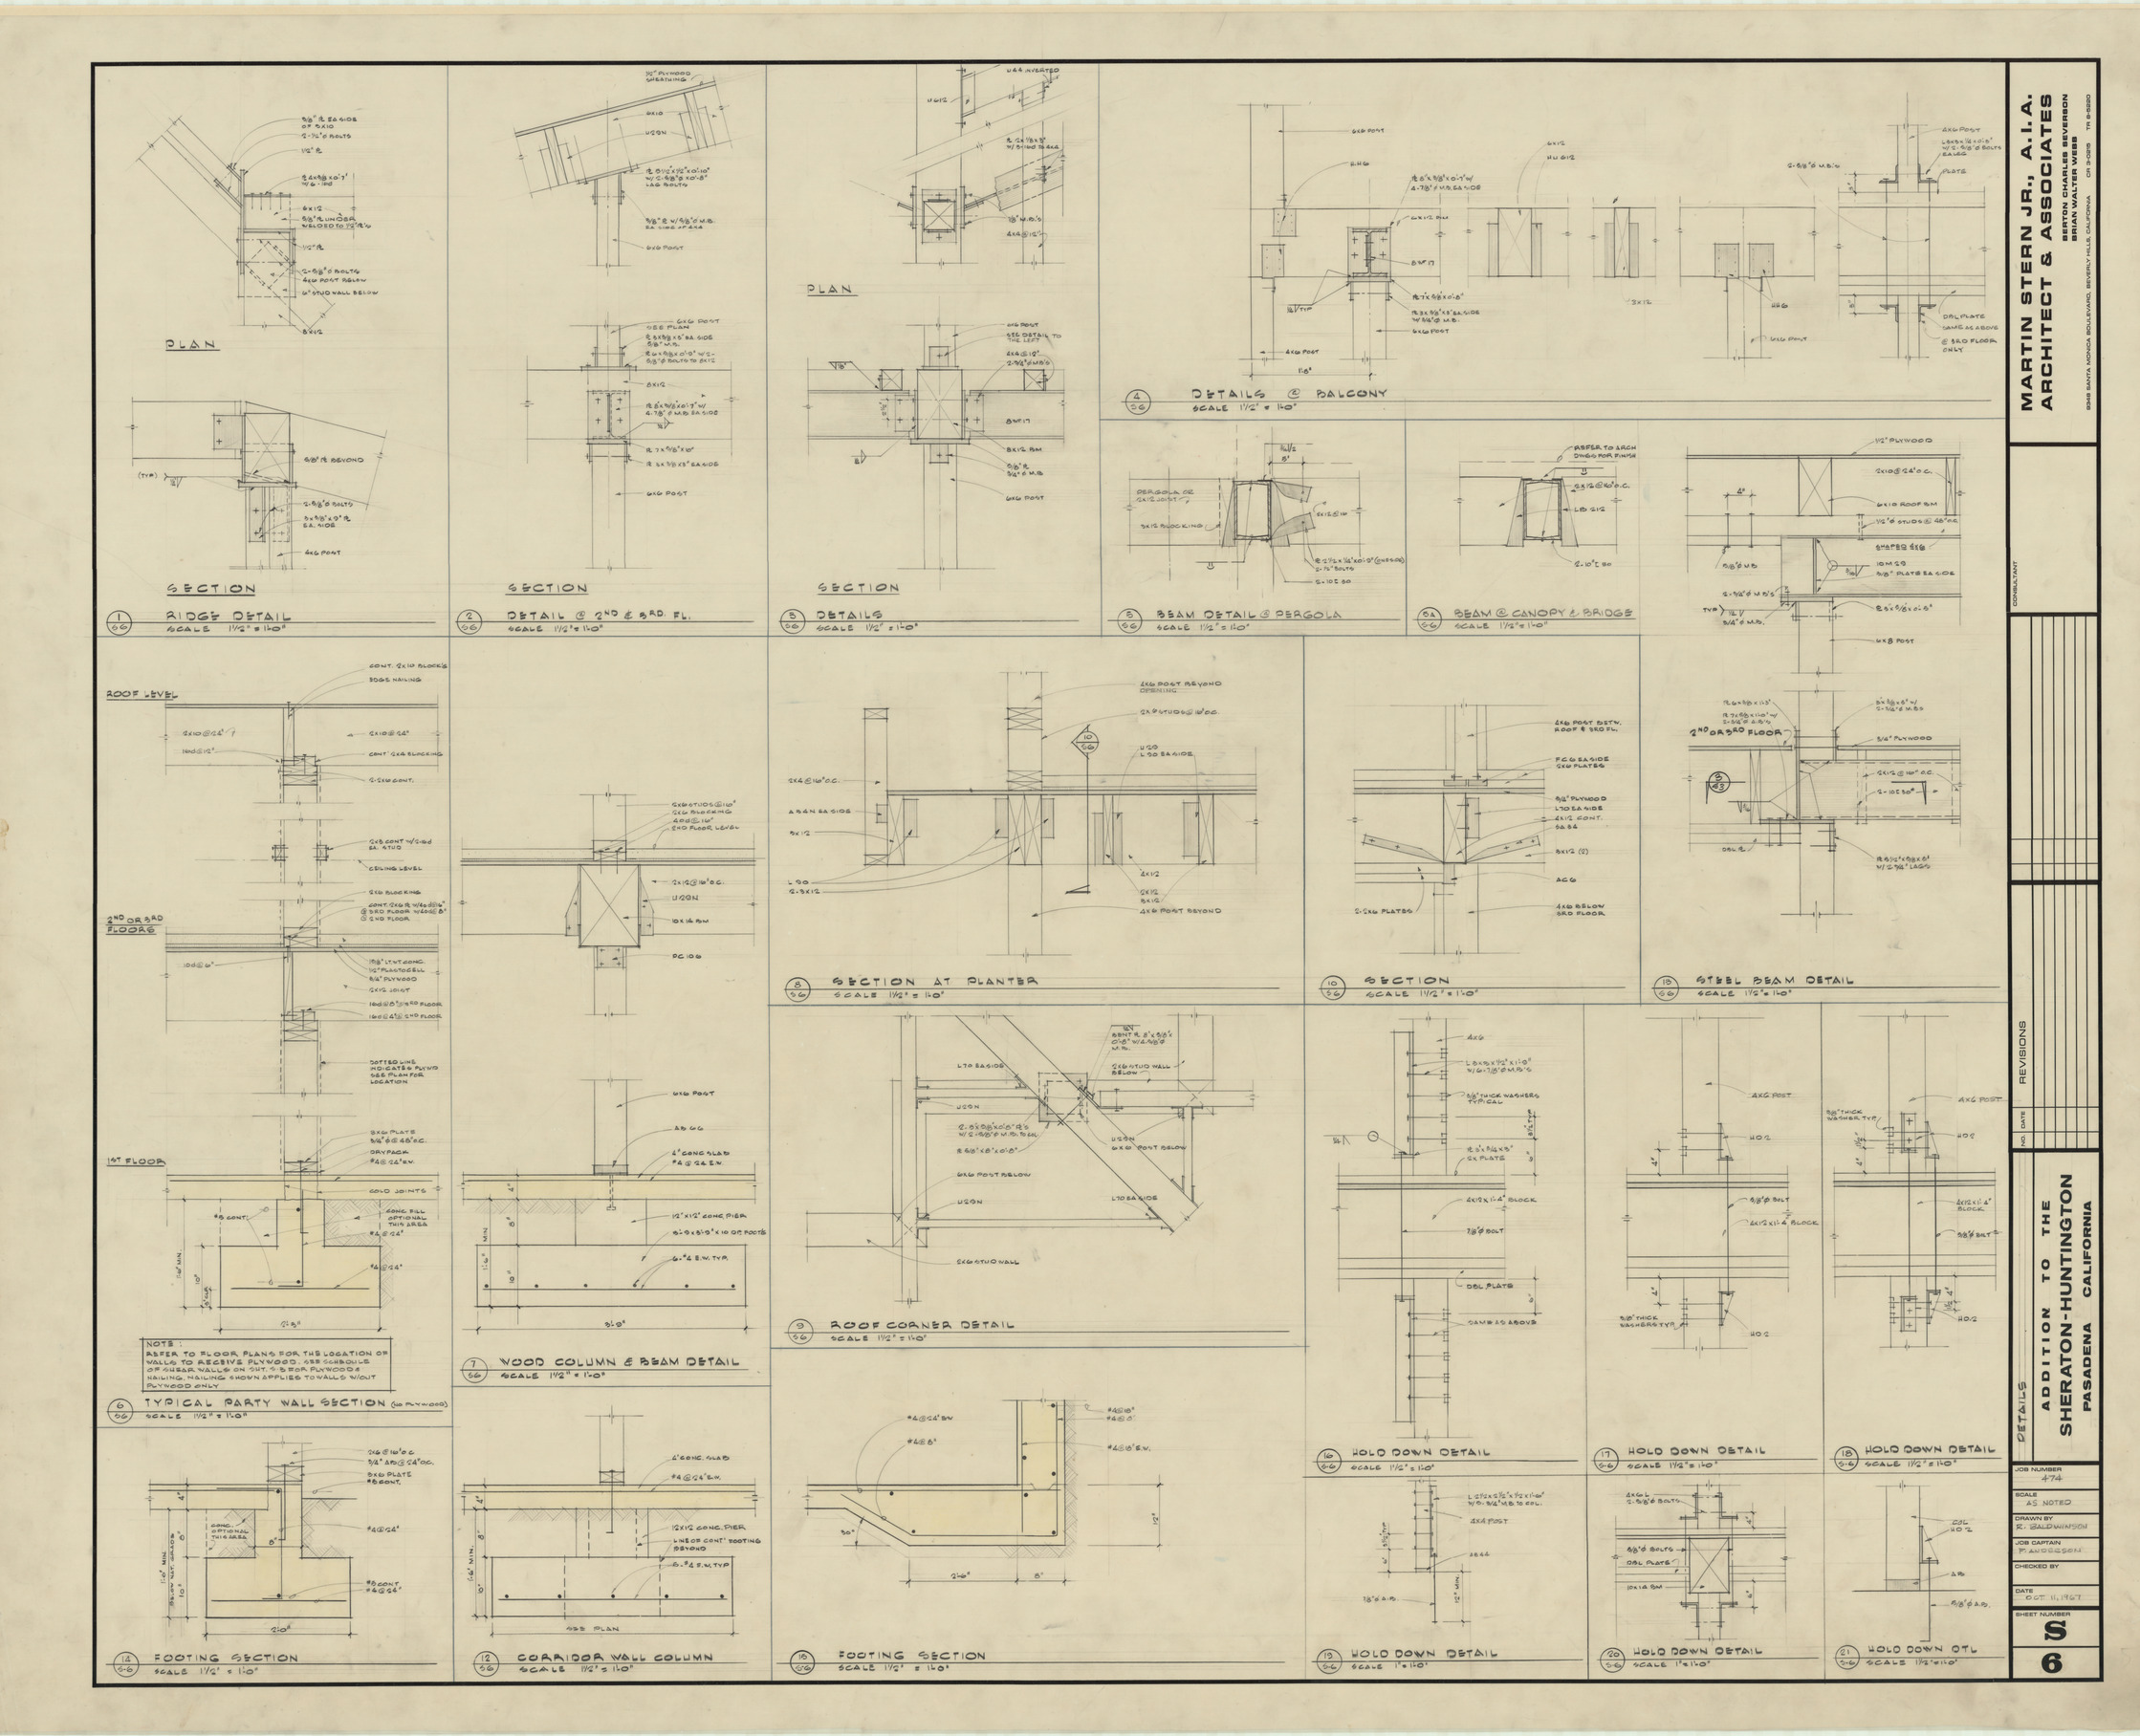 Huntington addition, architectural, electrical, mechanical, and plumbing: architectural drawings, image 020